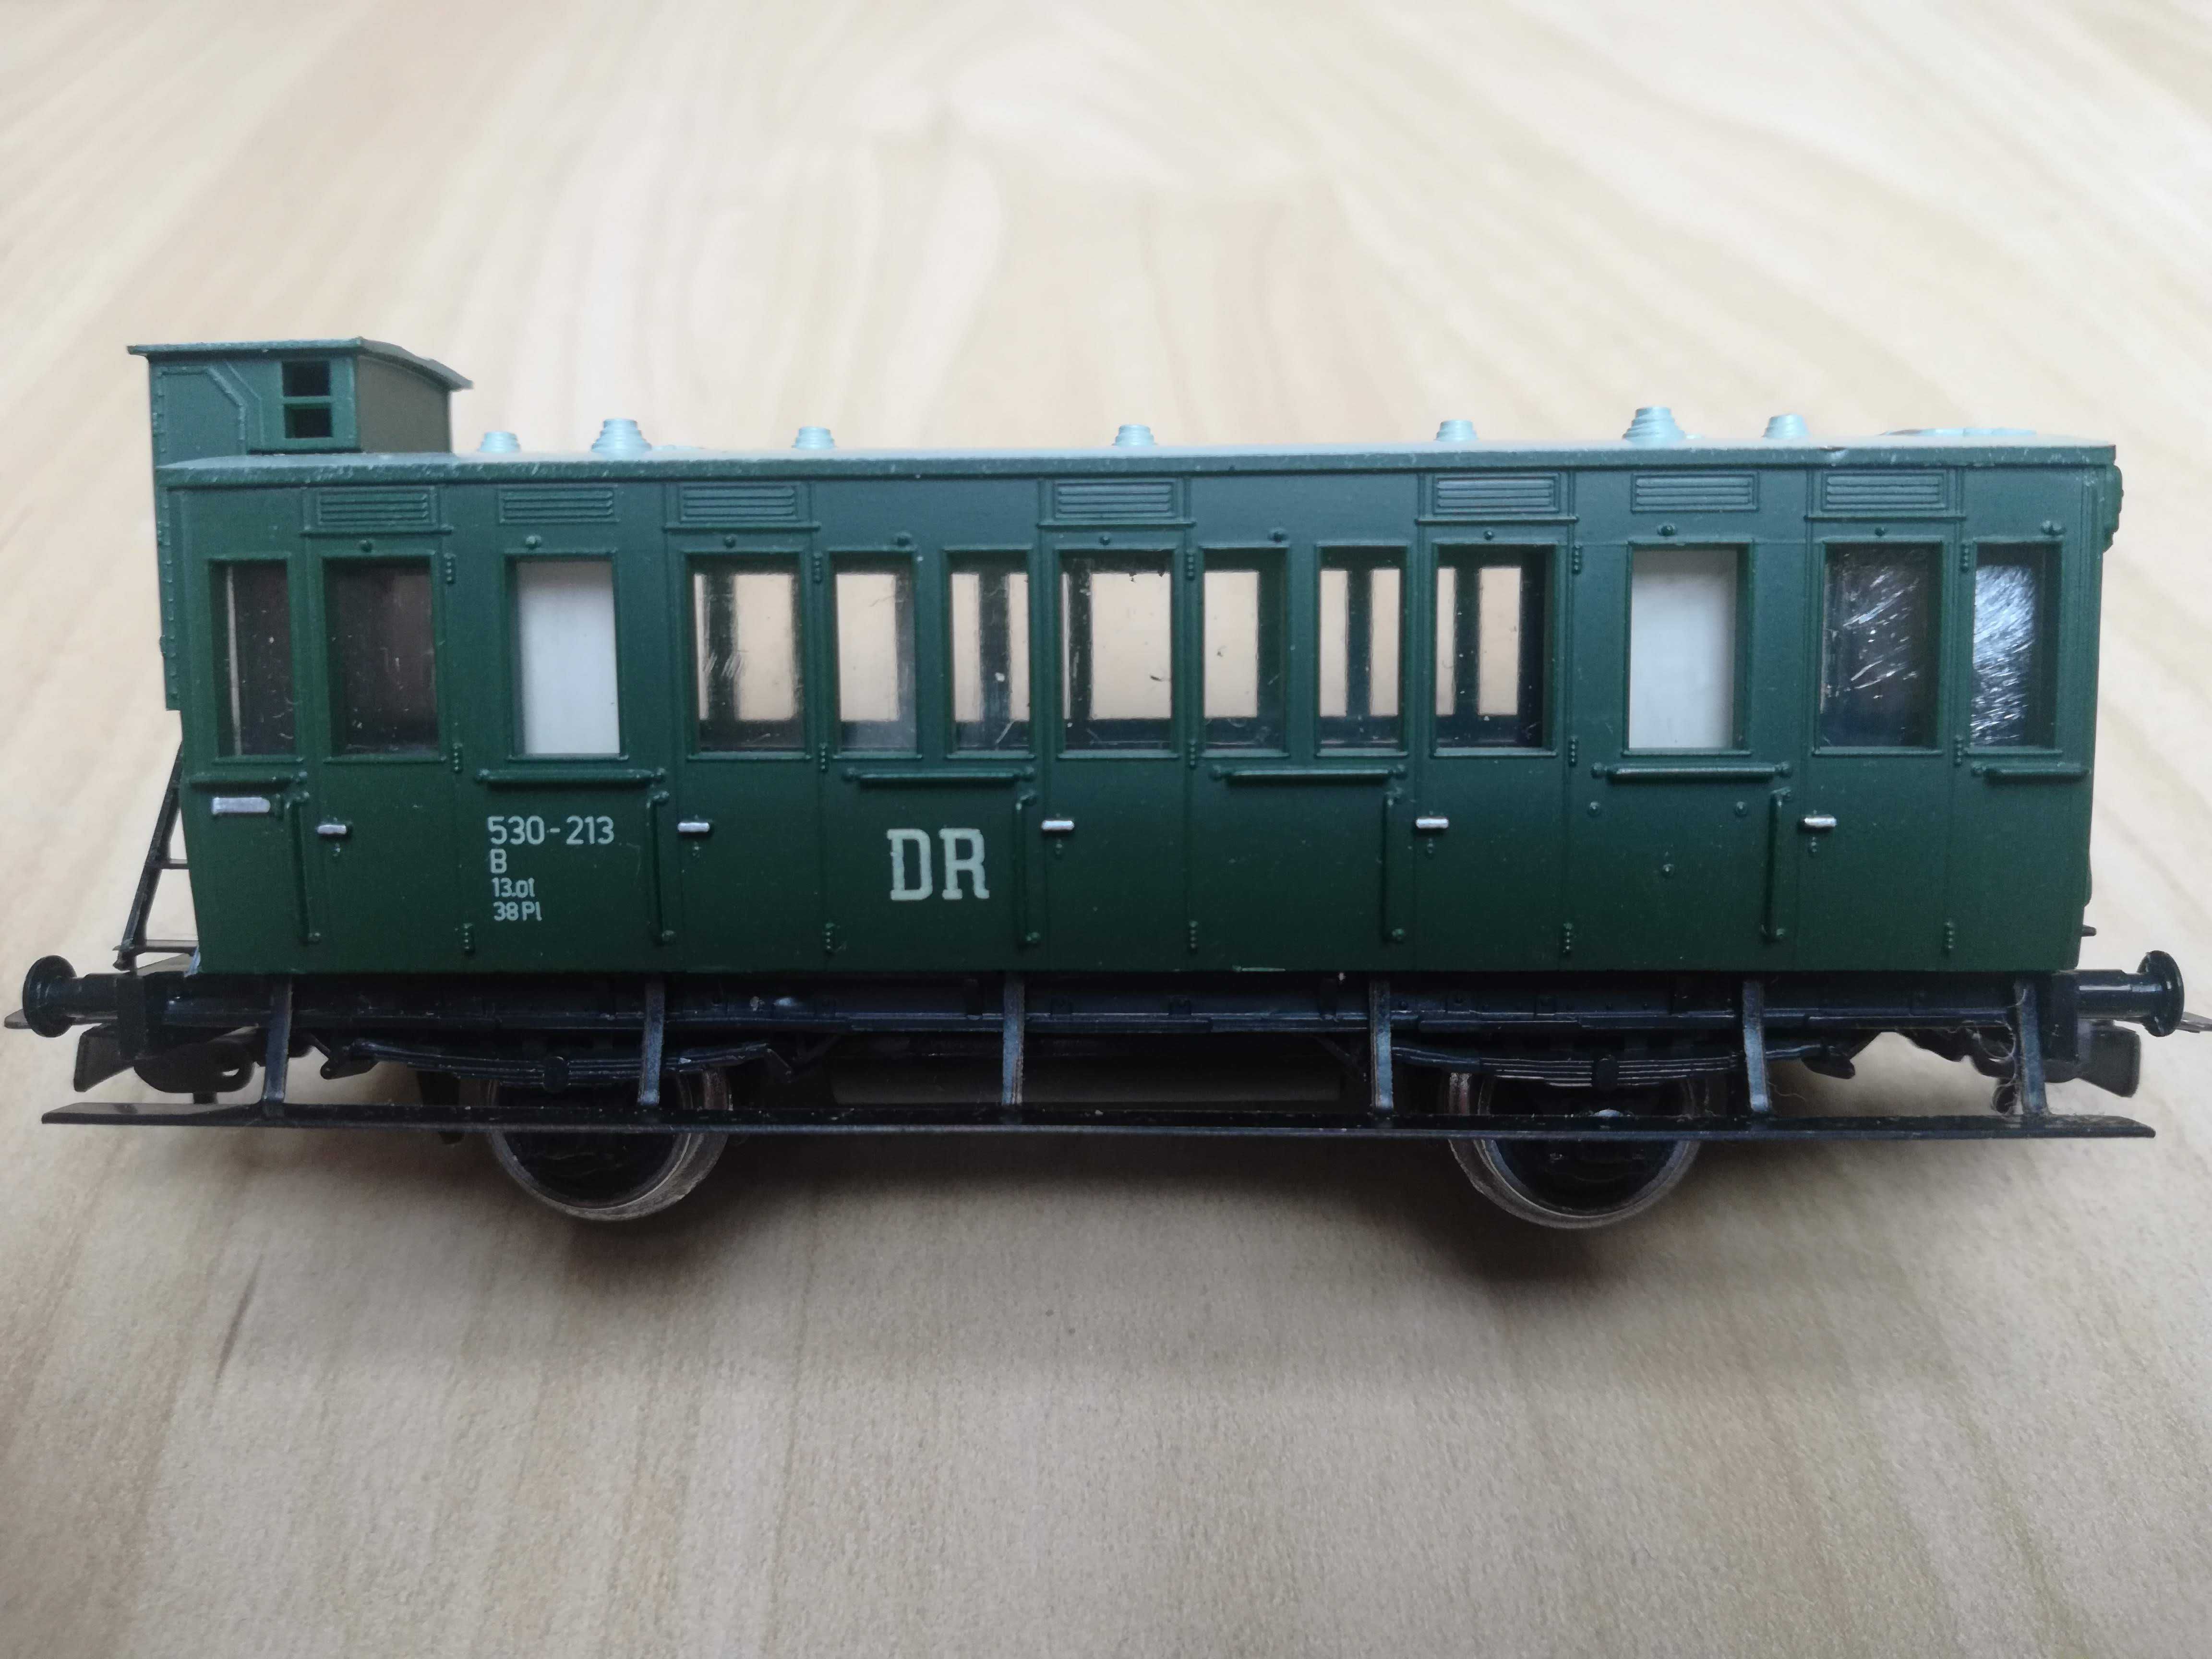 Wagon osobowy PIKO 04374 (DR 530-213) H0 1:87 16,5mm